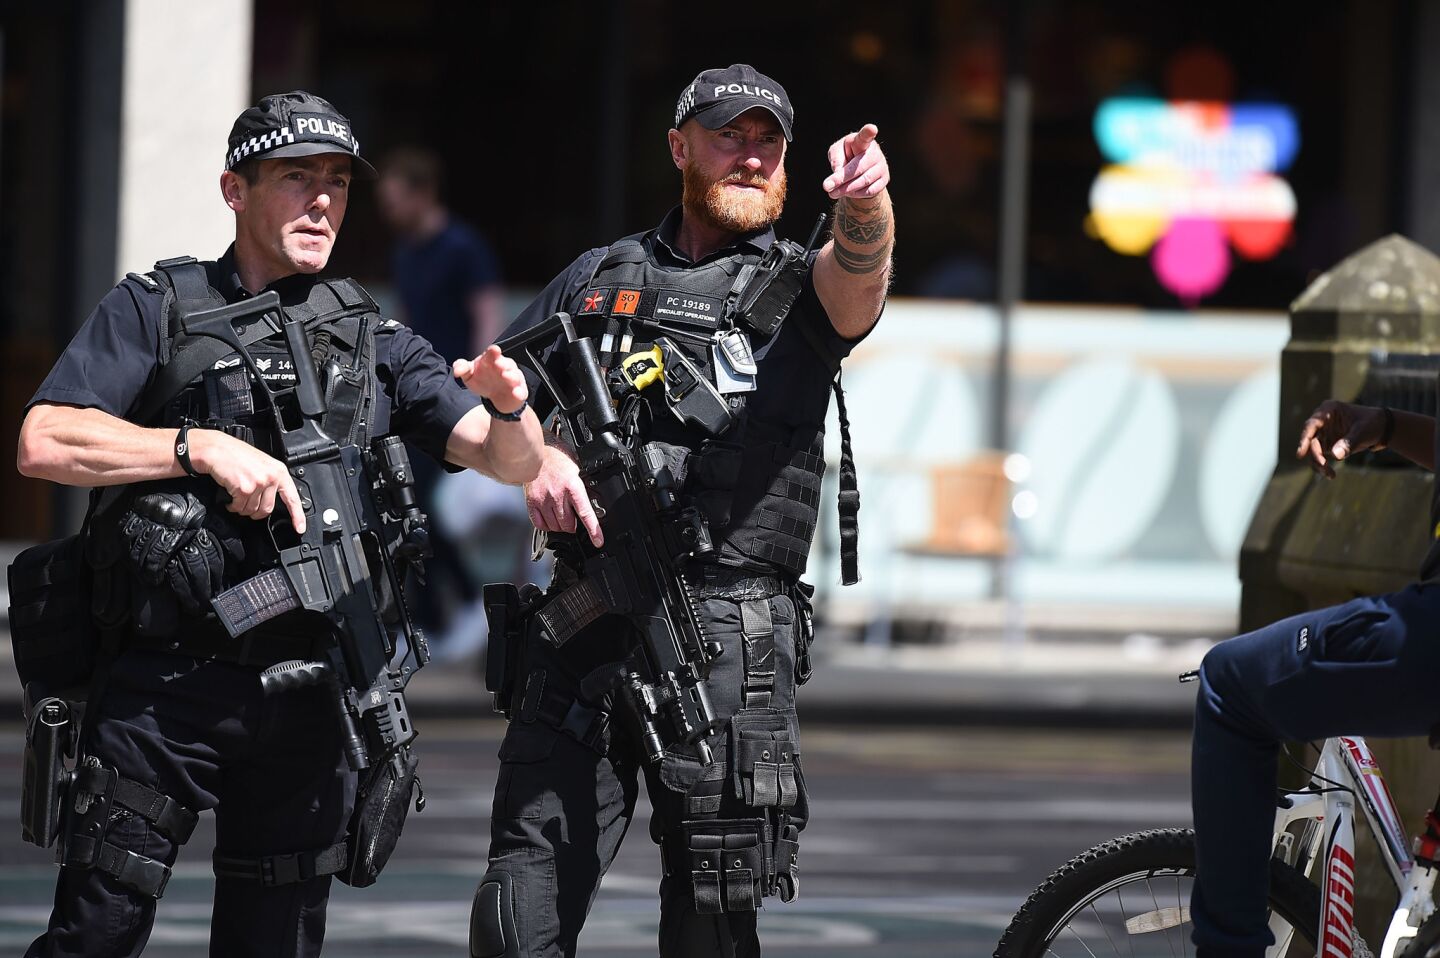 Police stand guard Tuesday near Manchester Arena, where 22 people were killed in a suicide bombing at an Ariana Grande concert the night before.